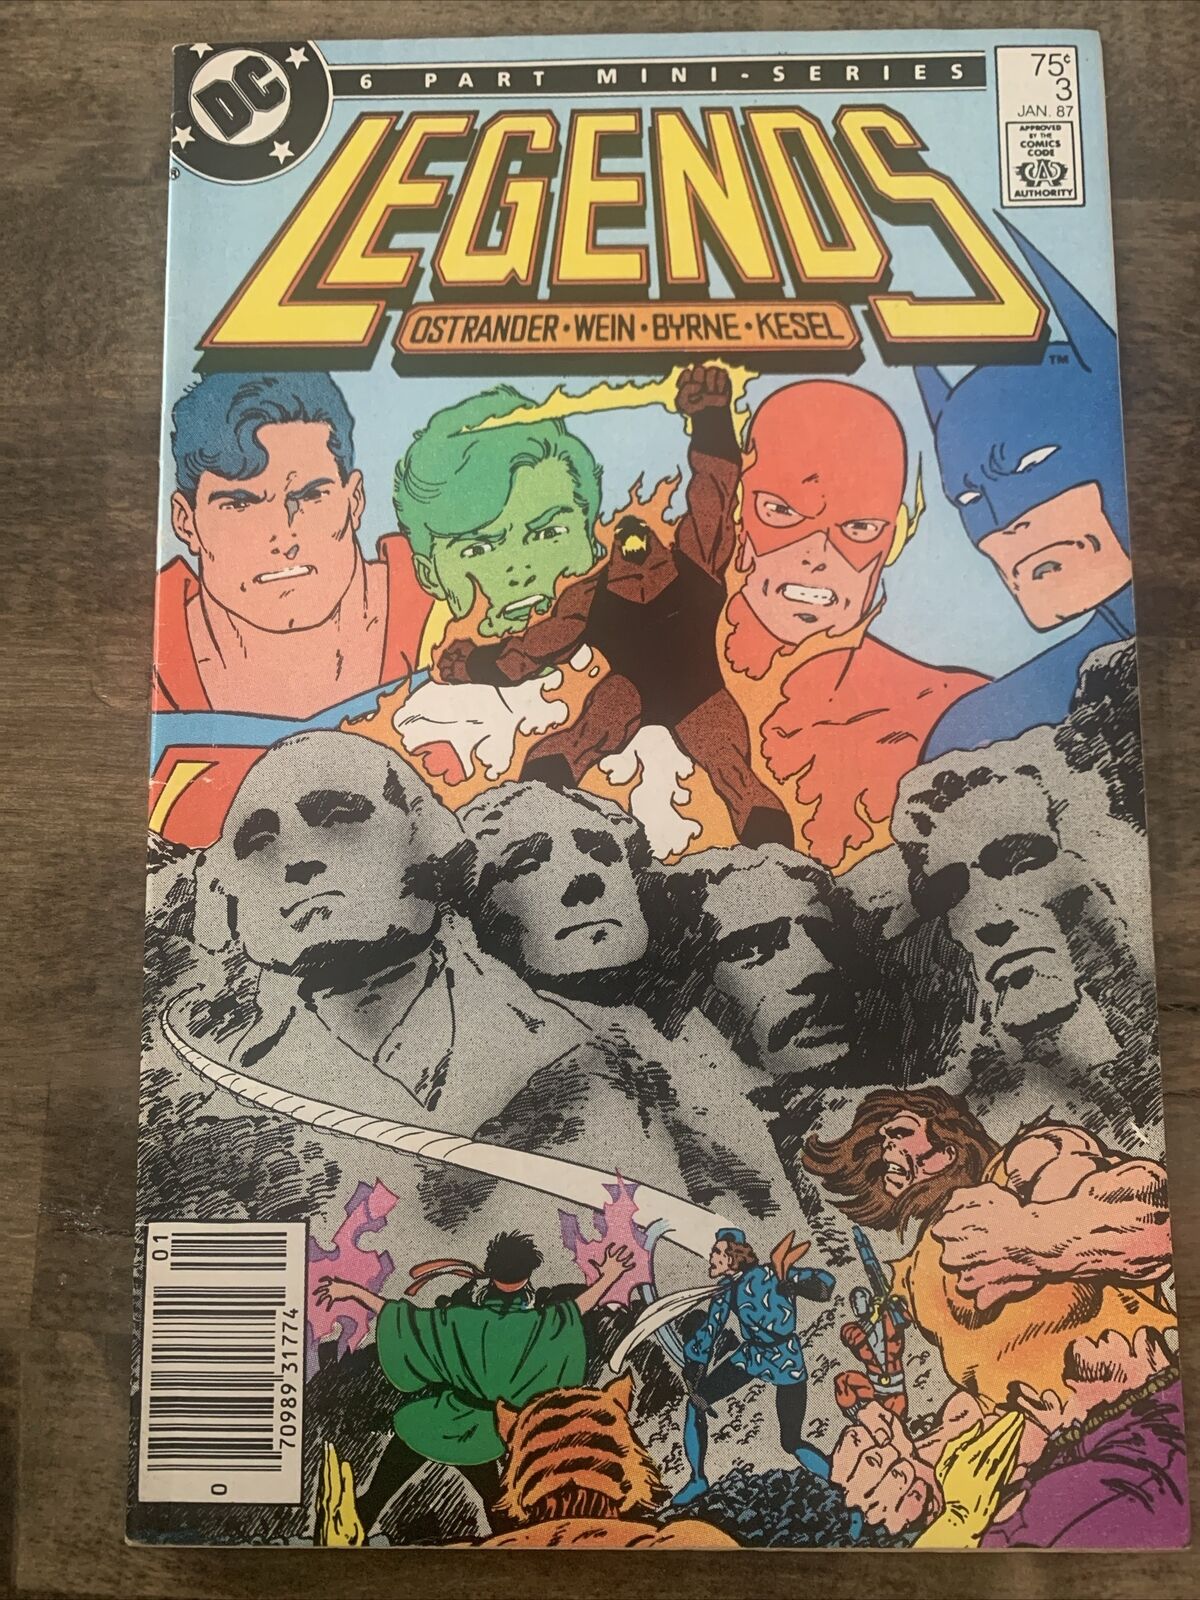 Legends #3 DC Comics 1987 1st Appearance Of The New Suicide Squad Ostrander Wein